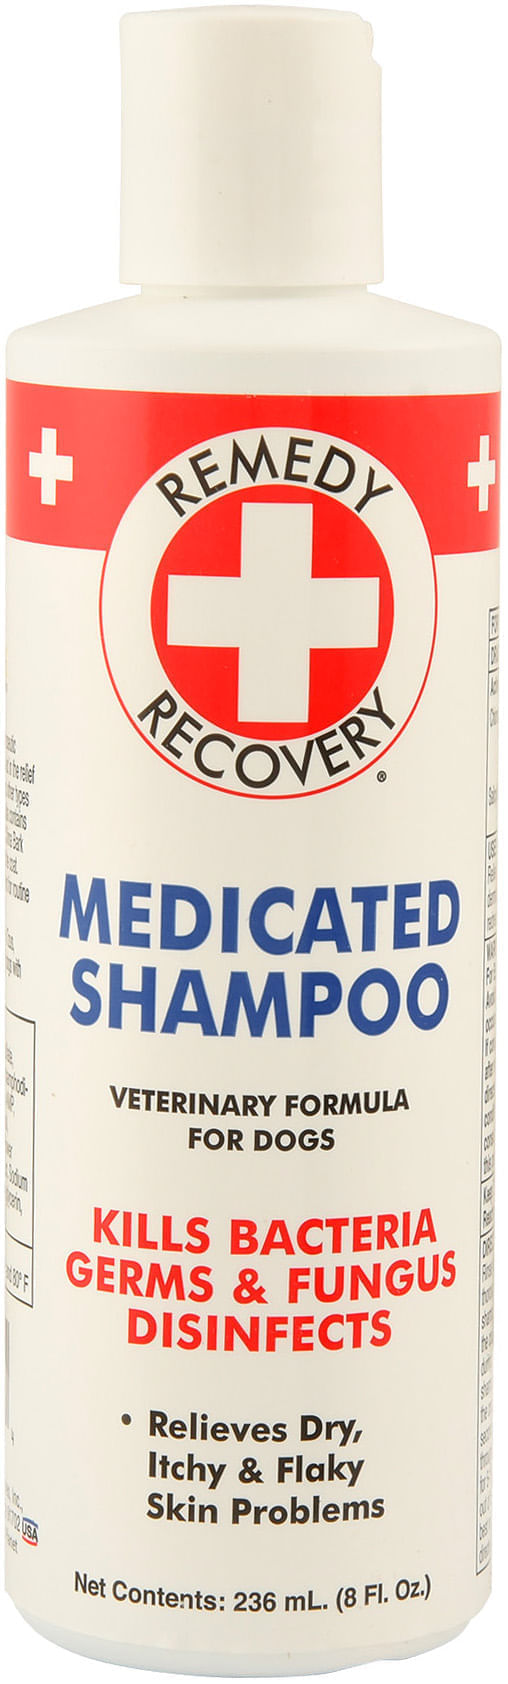 Remedy-Recovery-Medicated-Shampoo-for-Dogs